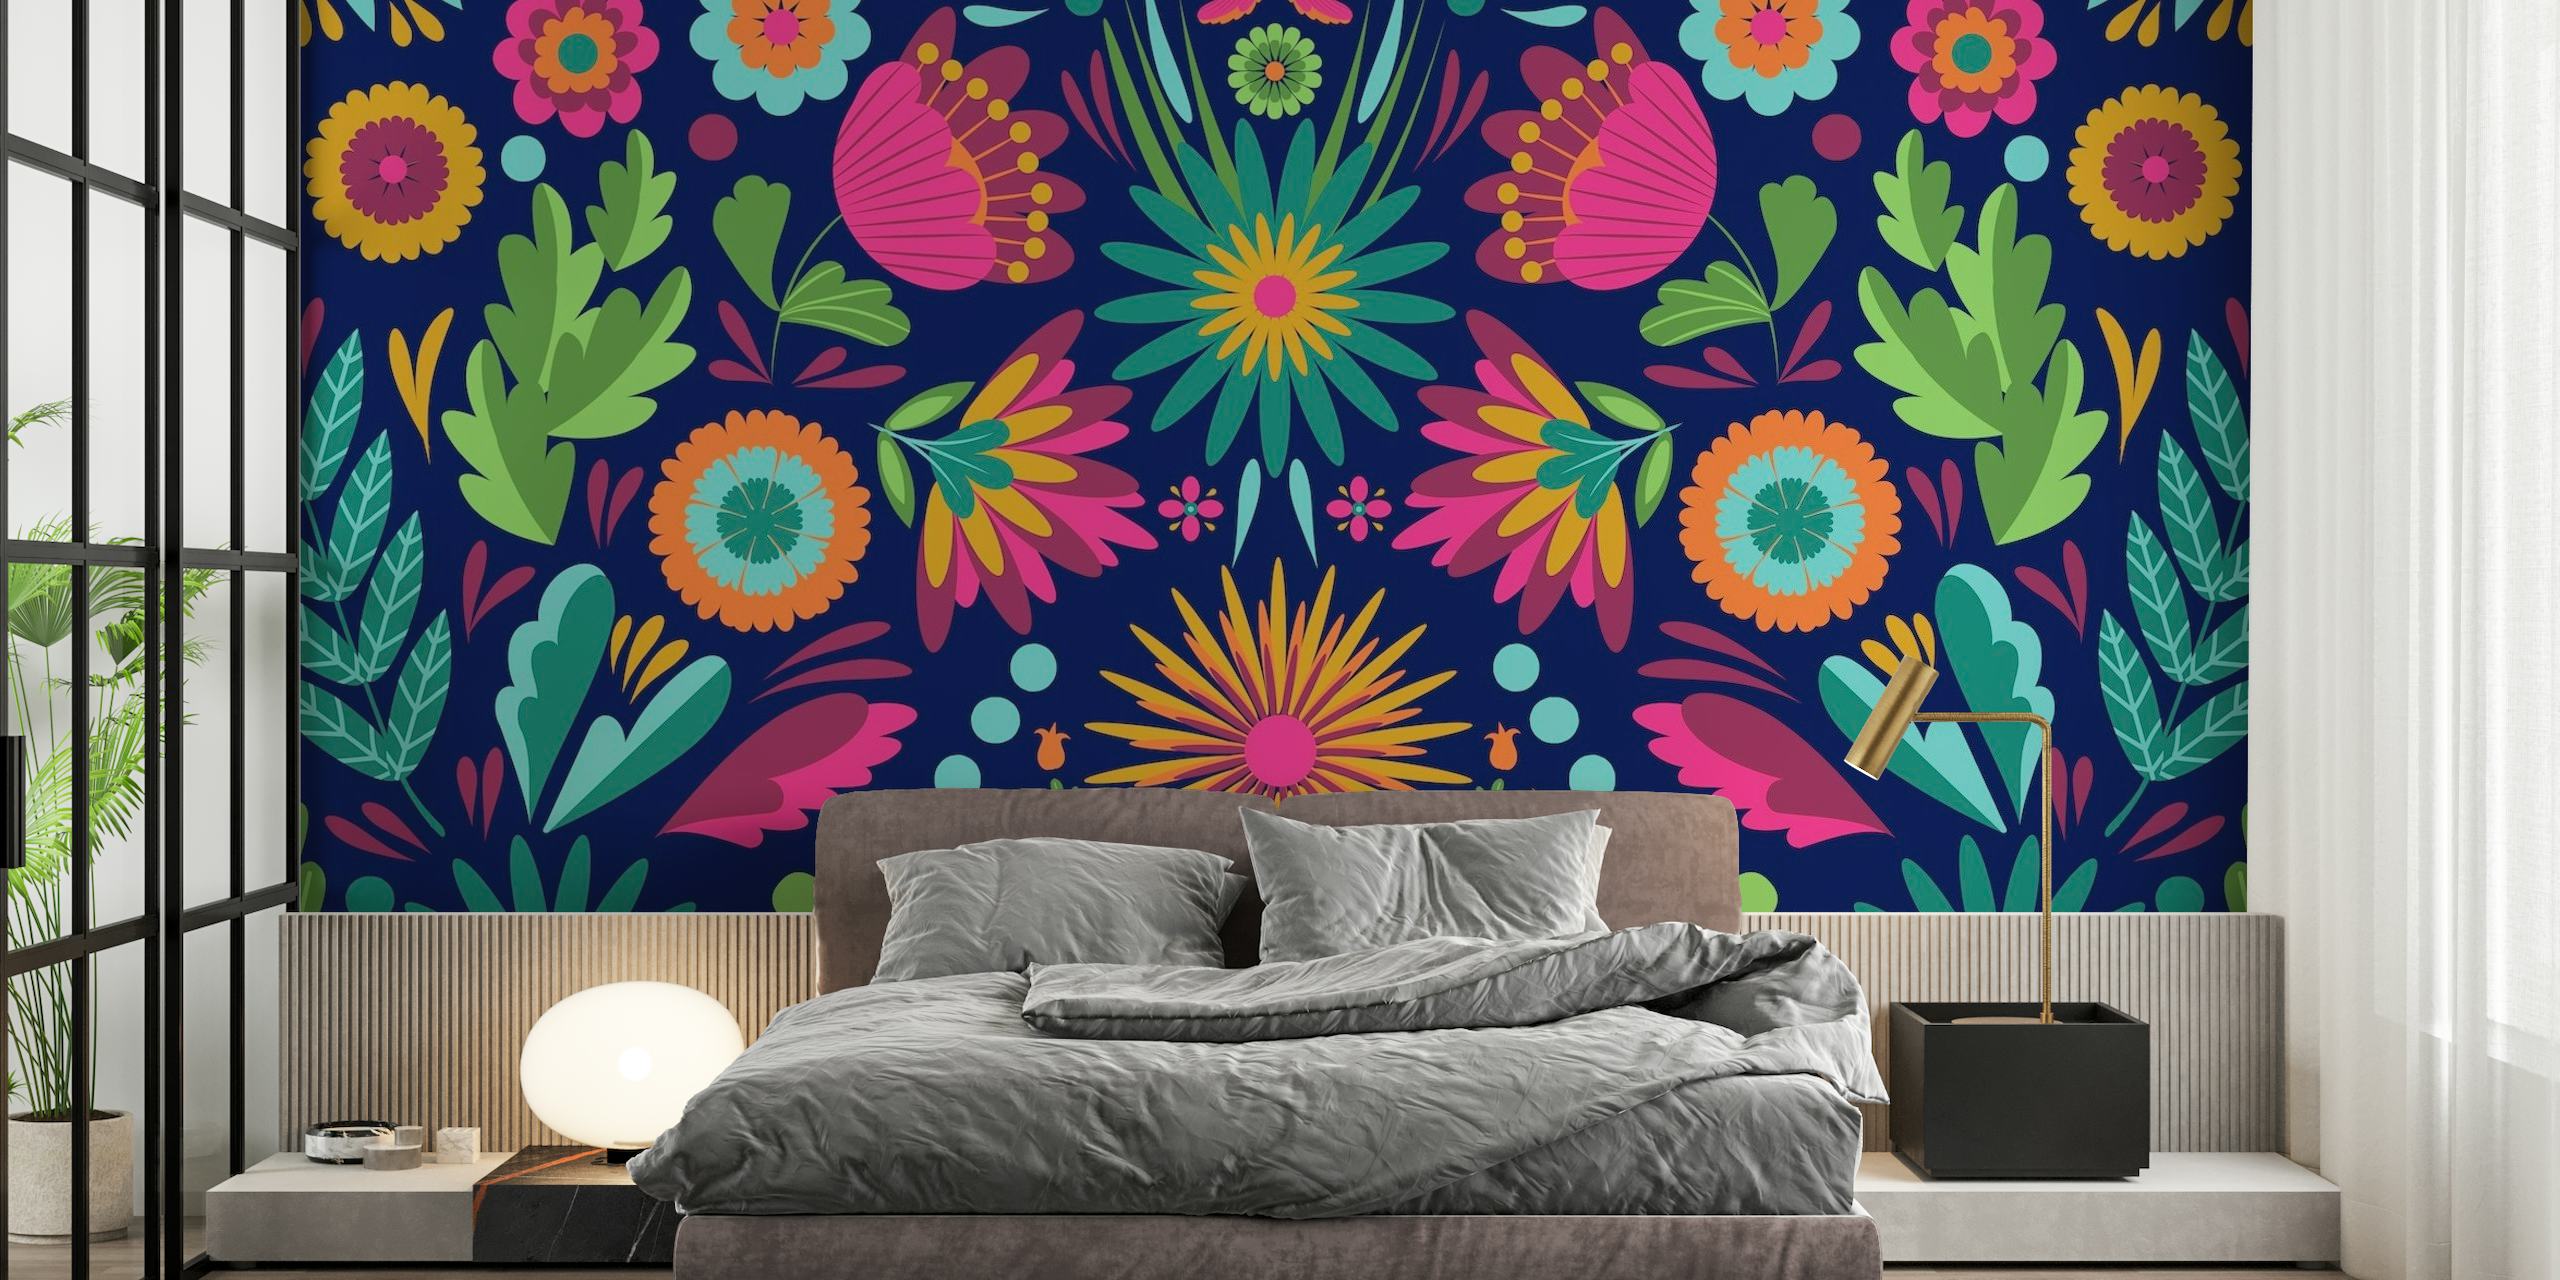 Frida Flowers Blue mural featuring vibrant colors and folk-art-inspired floral designs